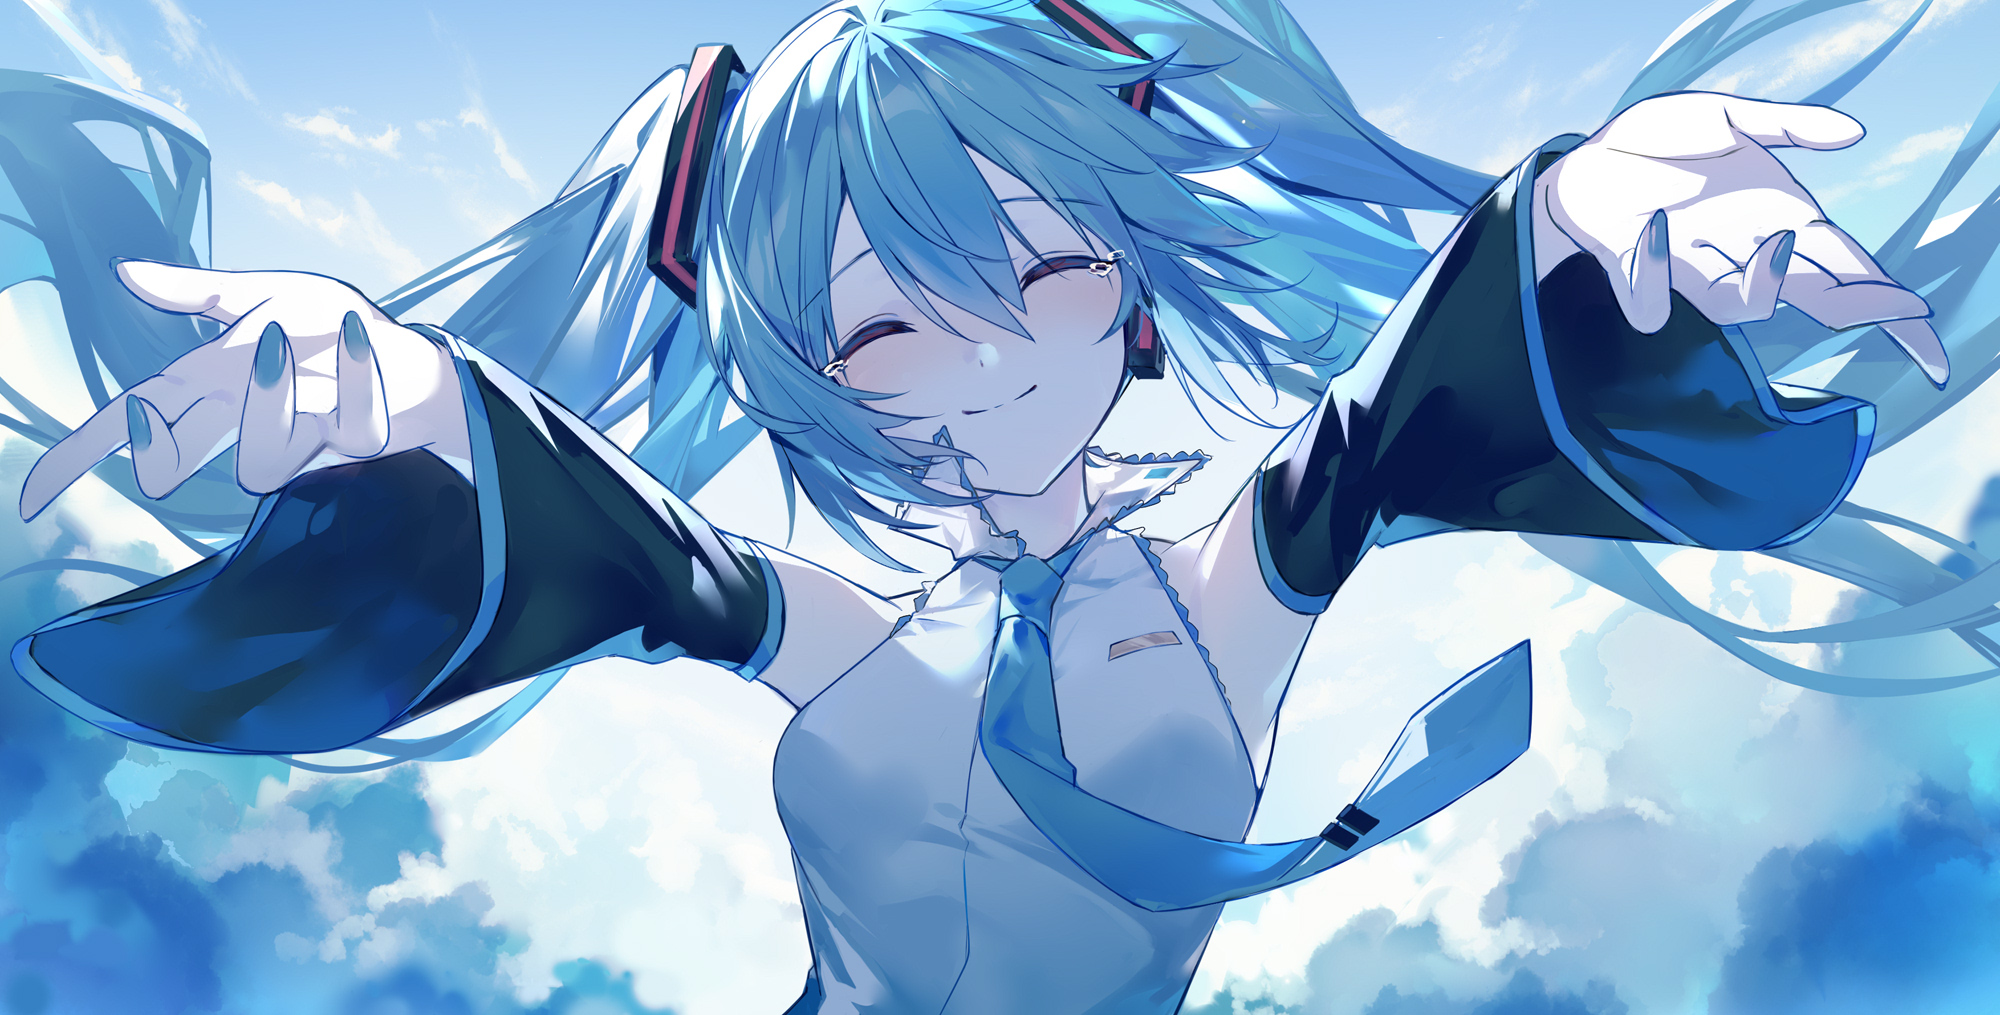 closed eyes, tears, blue hair, anime, anime girls, Hatsune Miku, Vocaloid,  twintails, clouds | 2000x1015 Wallpaper 